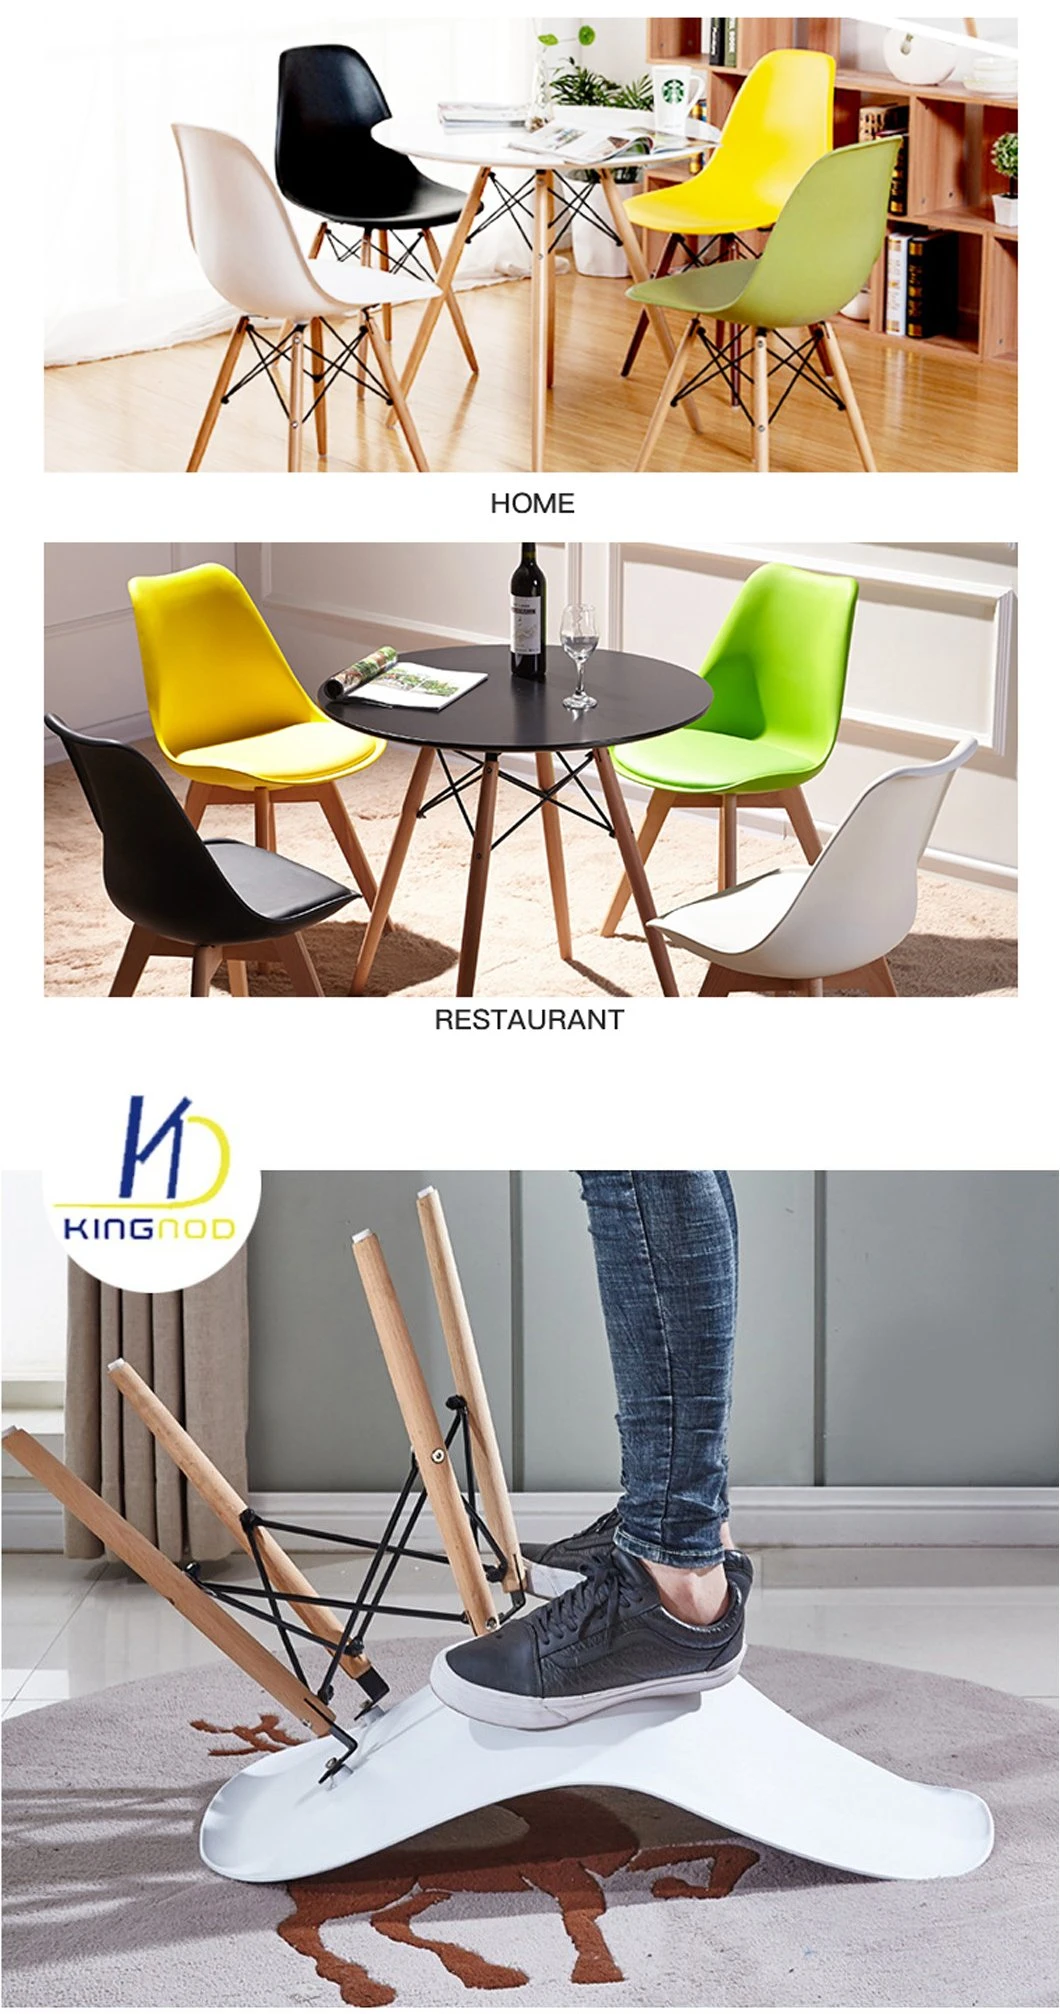 China Wholesale Outdoor Hot Sale Commercial Lounge/Restaurant/Plastic Chairs Price for Dining/Modern/Party/Garden/Coffee Shop/Event/Dining Room Furniture